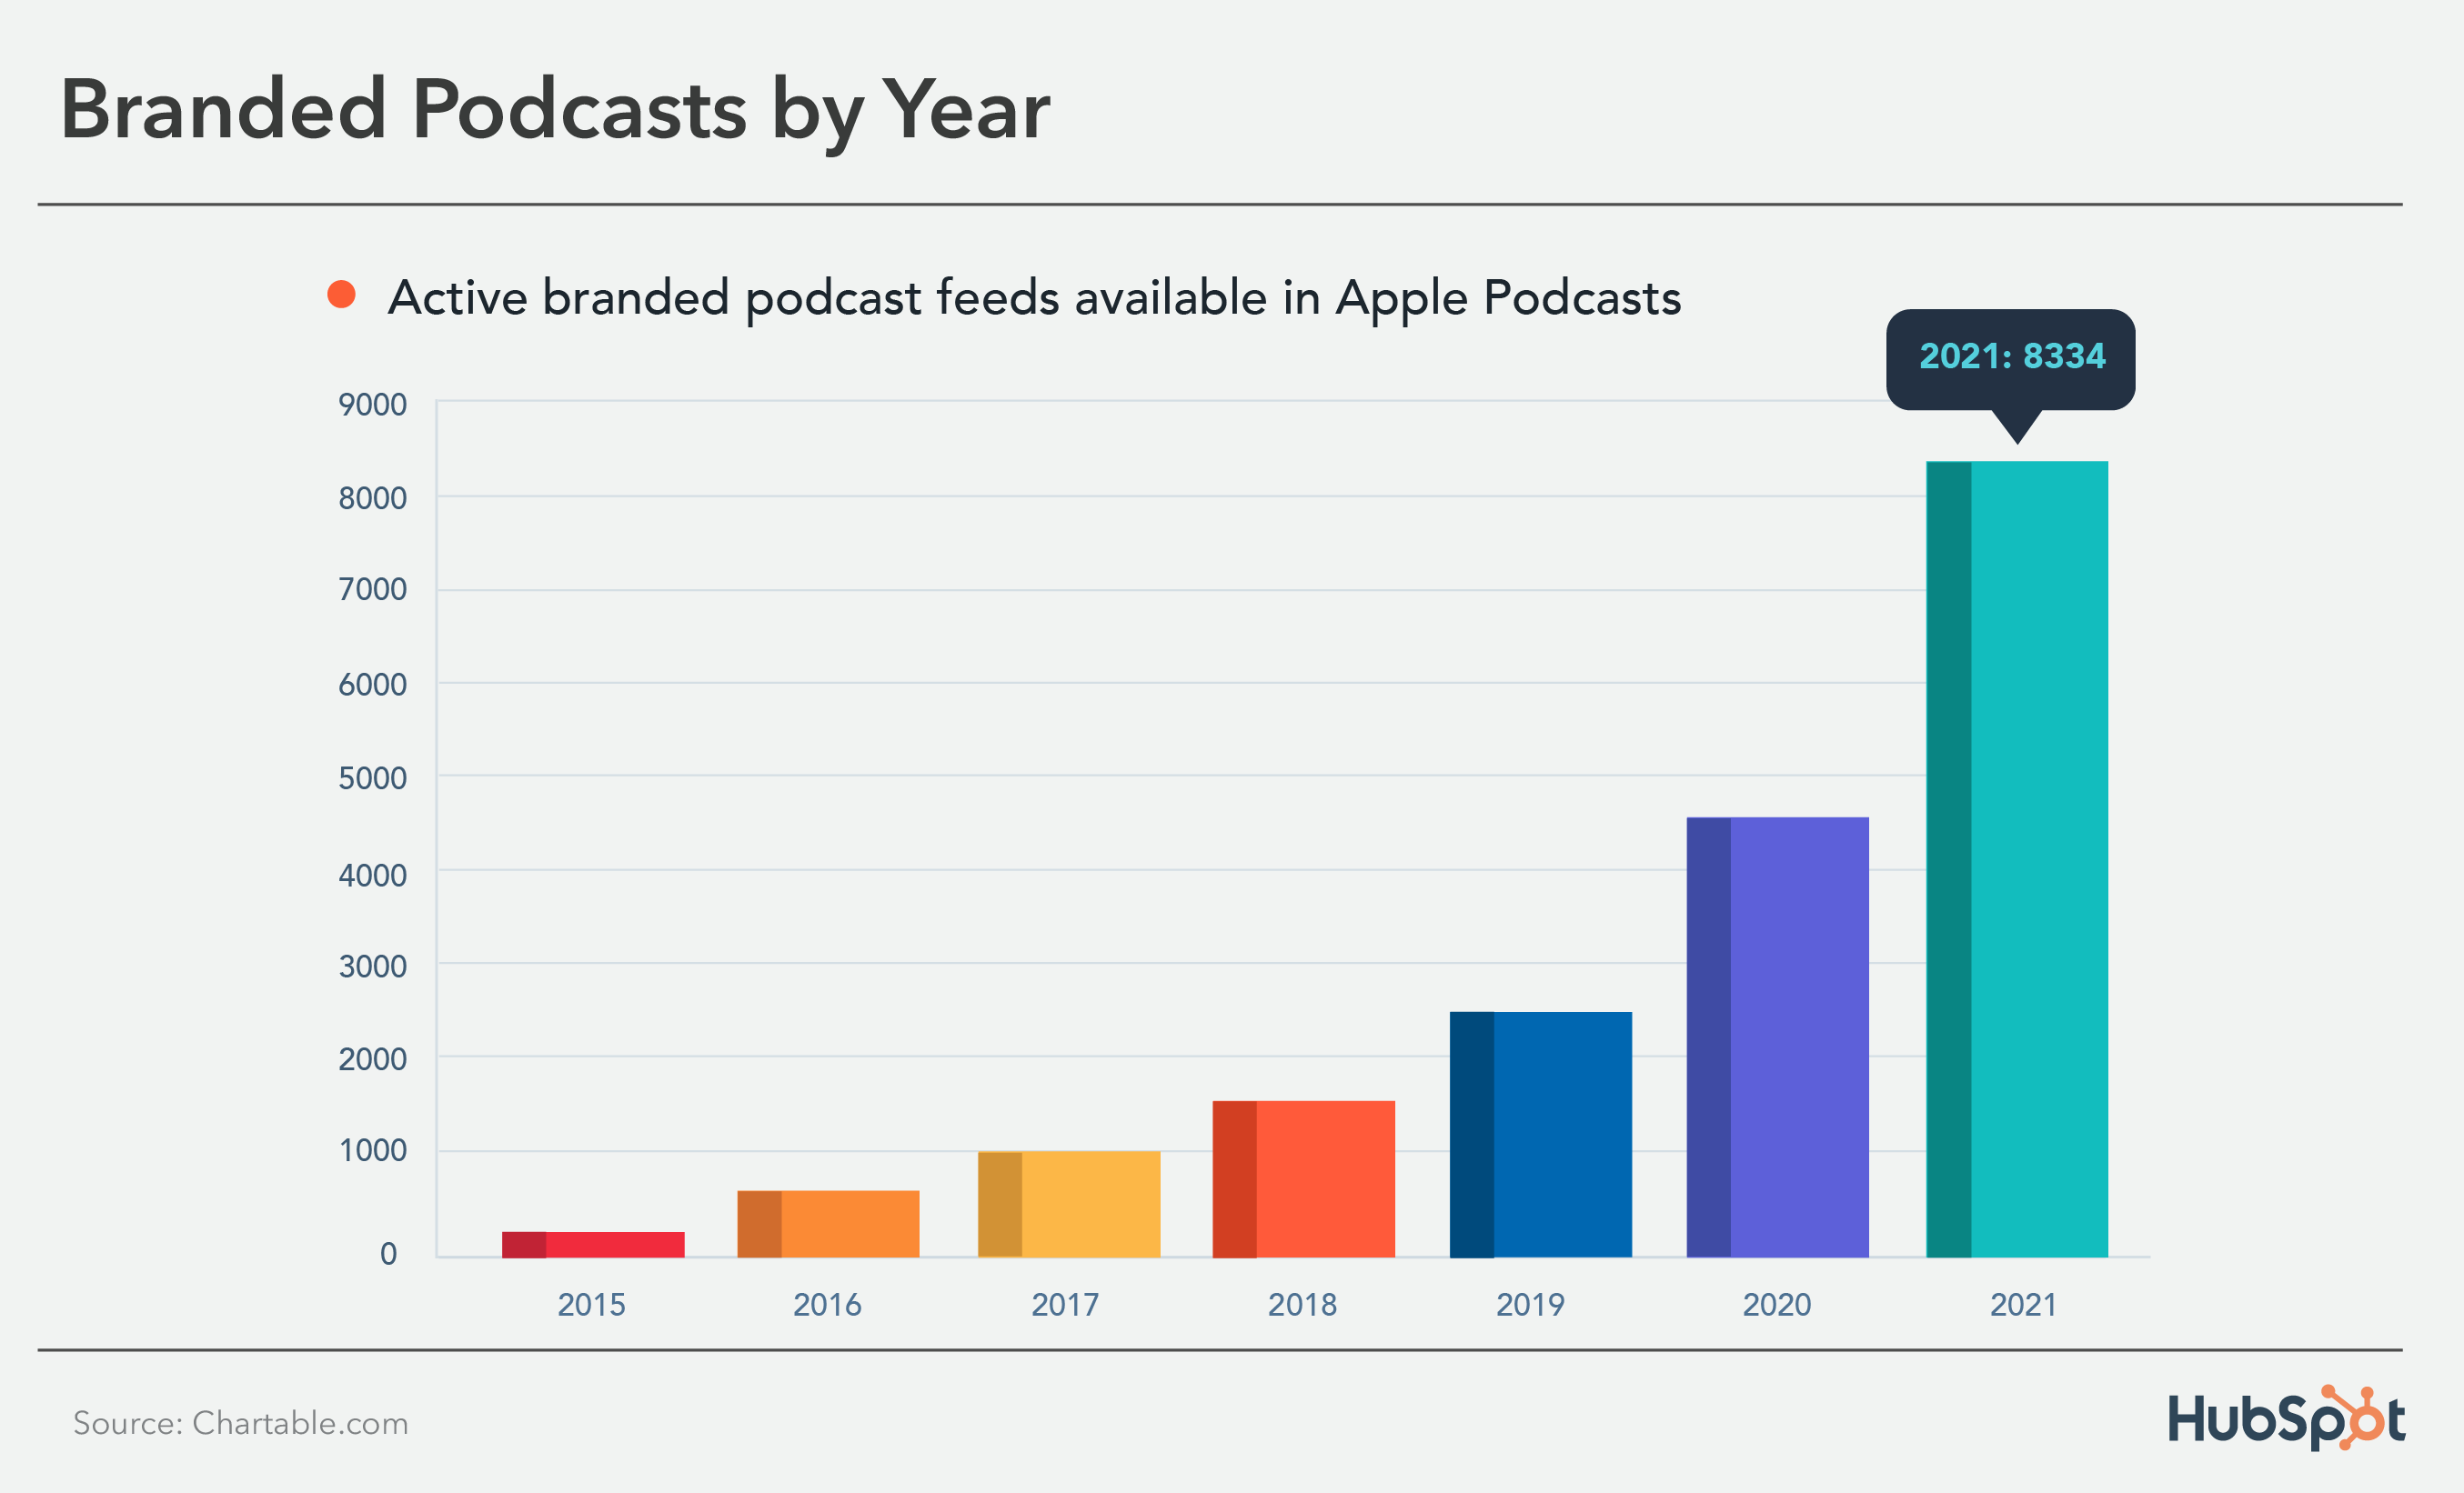  number of branded podcasts by year